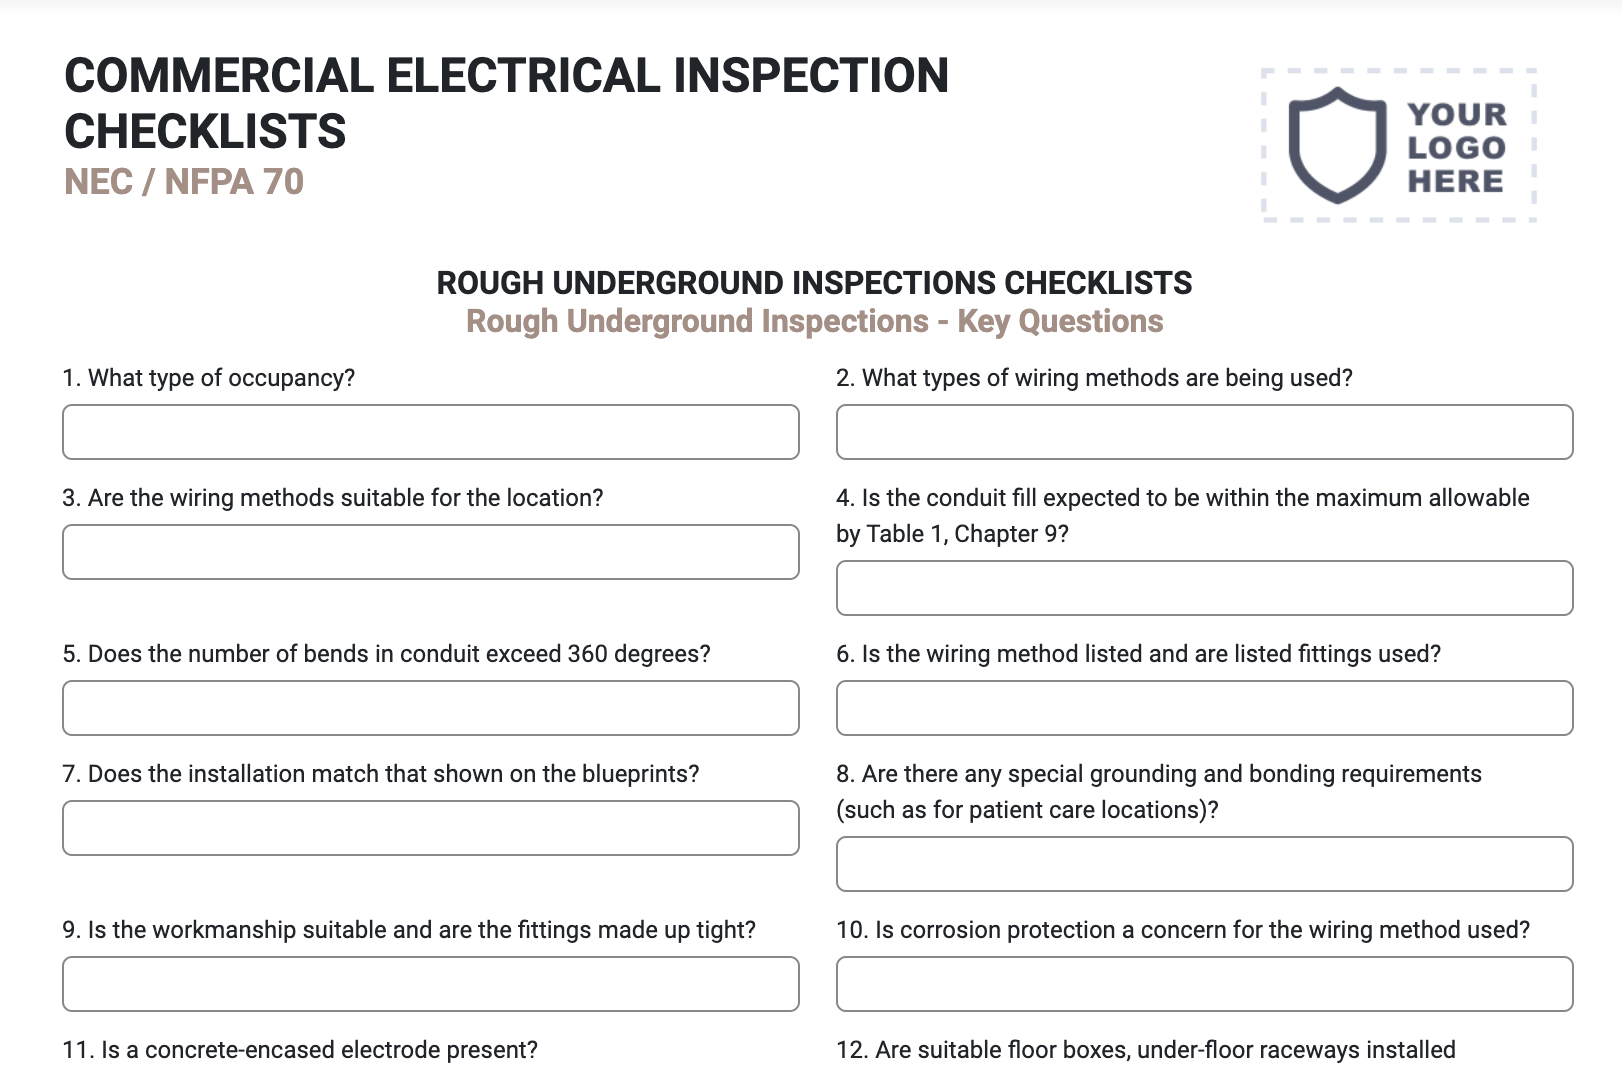 nfpa 70 inspection checklist form